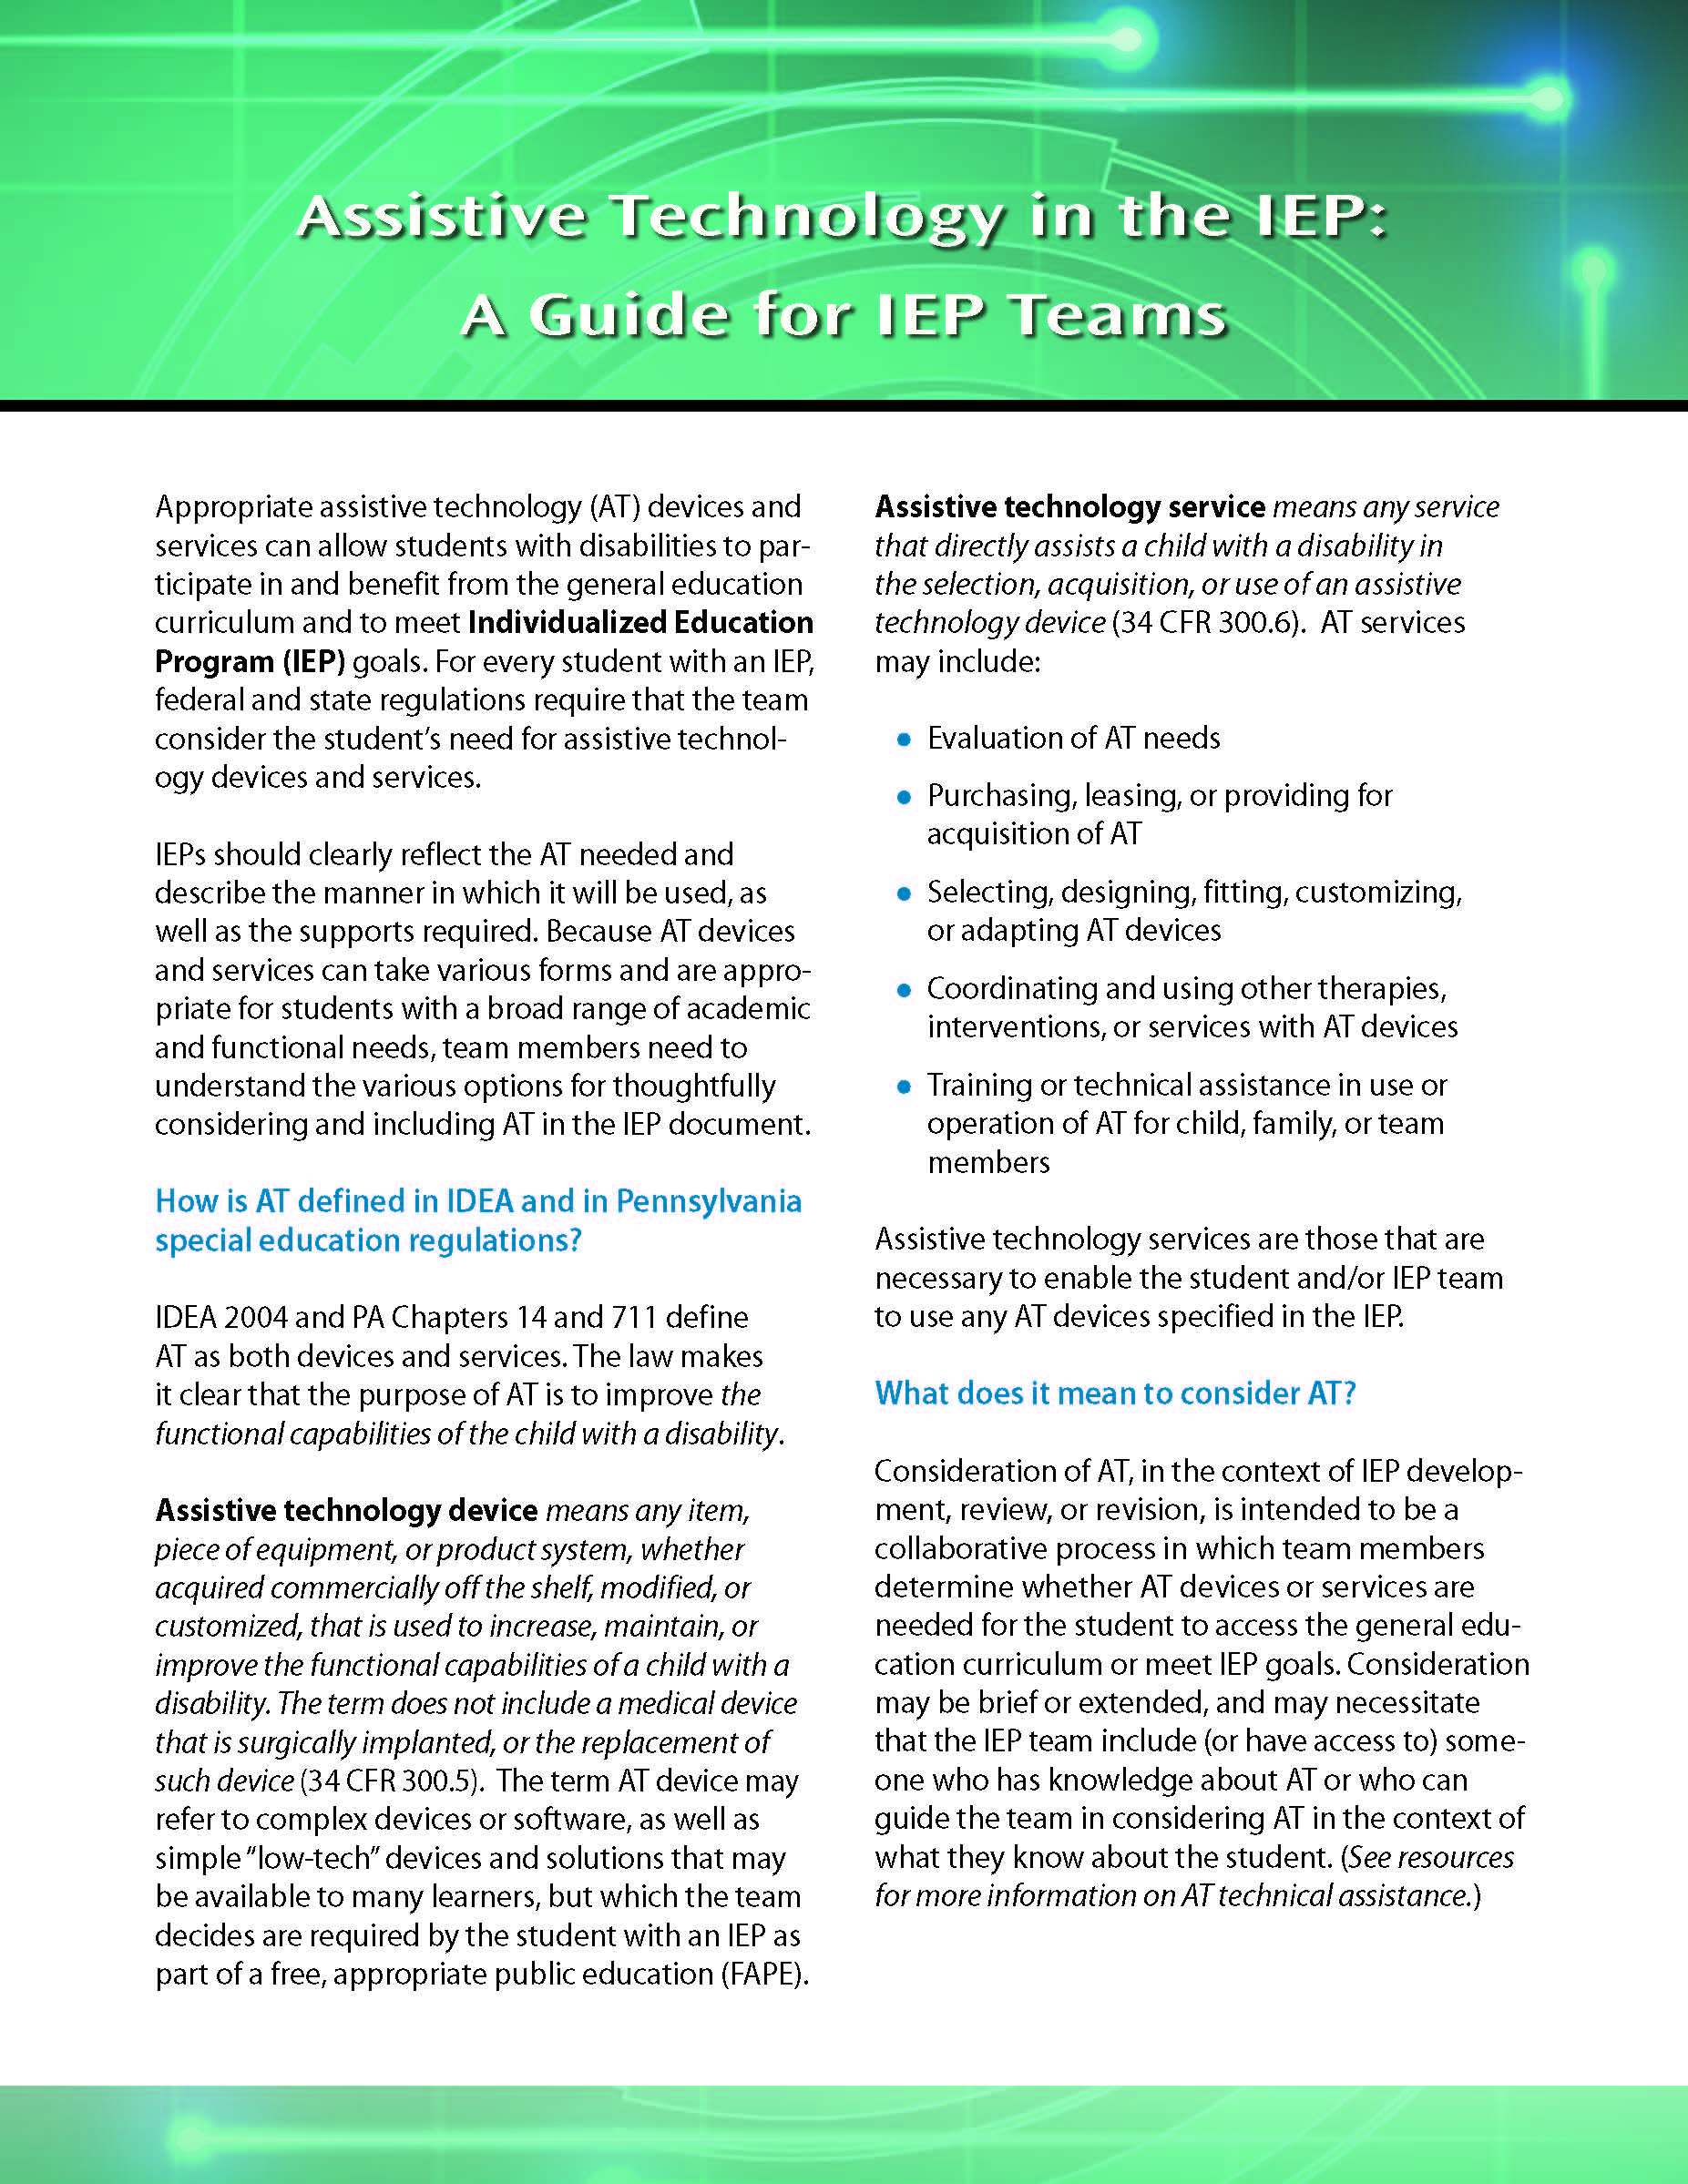 Assistive Technology in the IEP: A Guide for IEP Teams